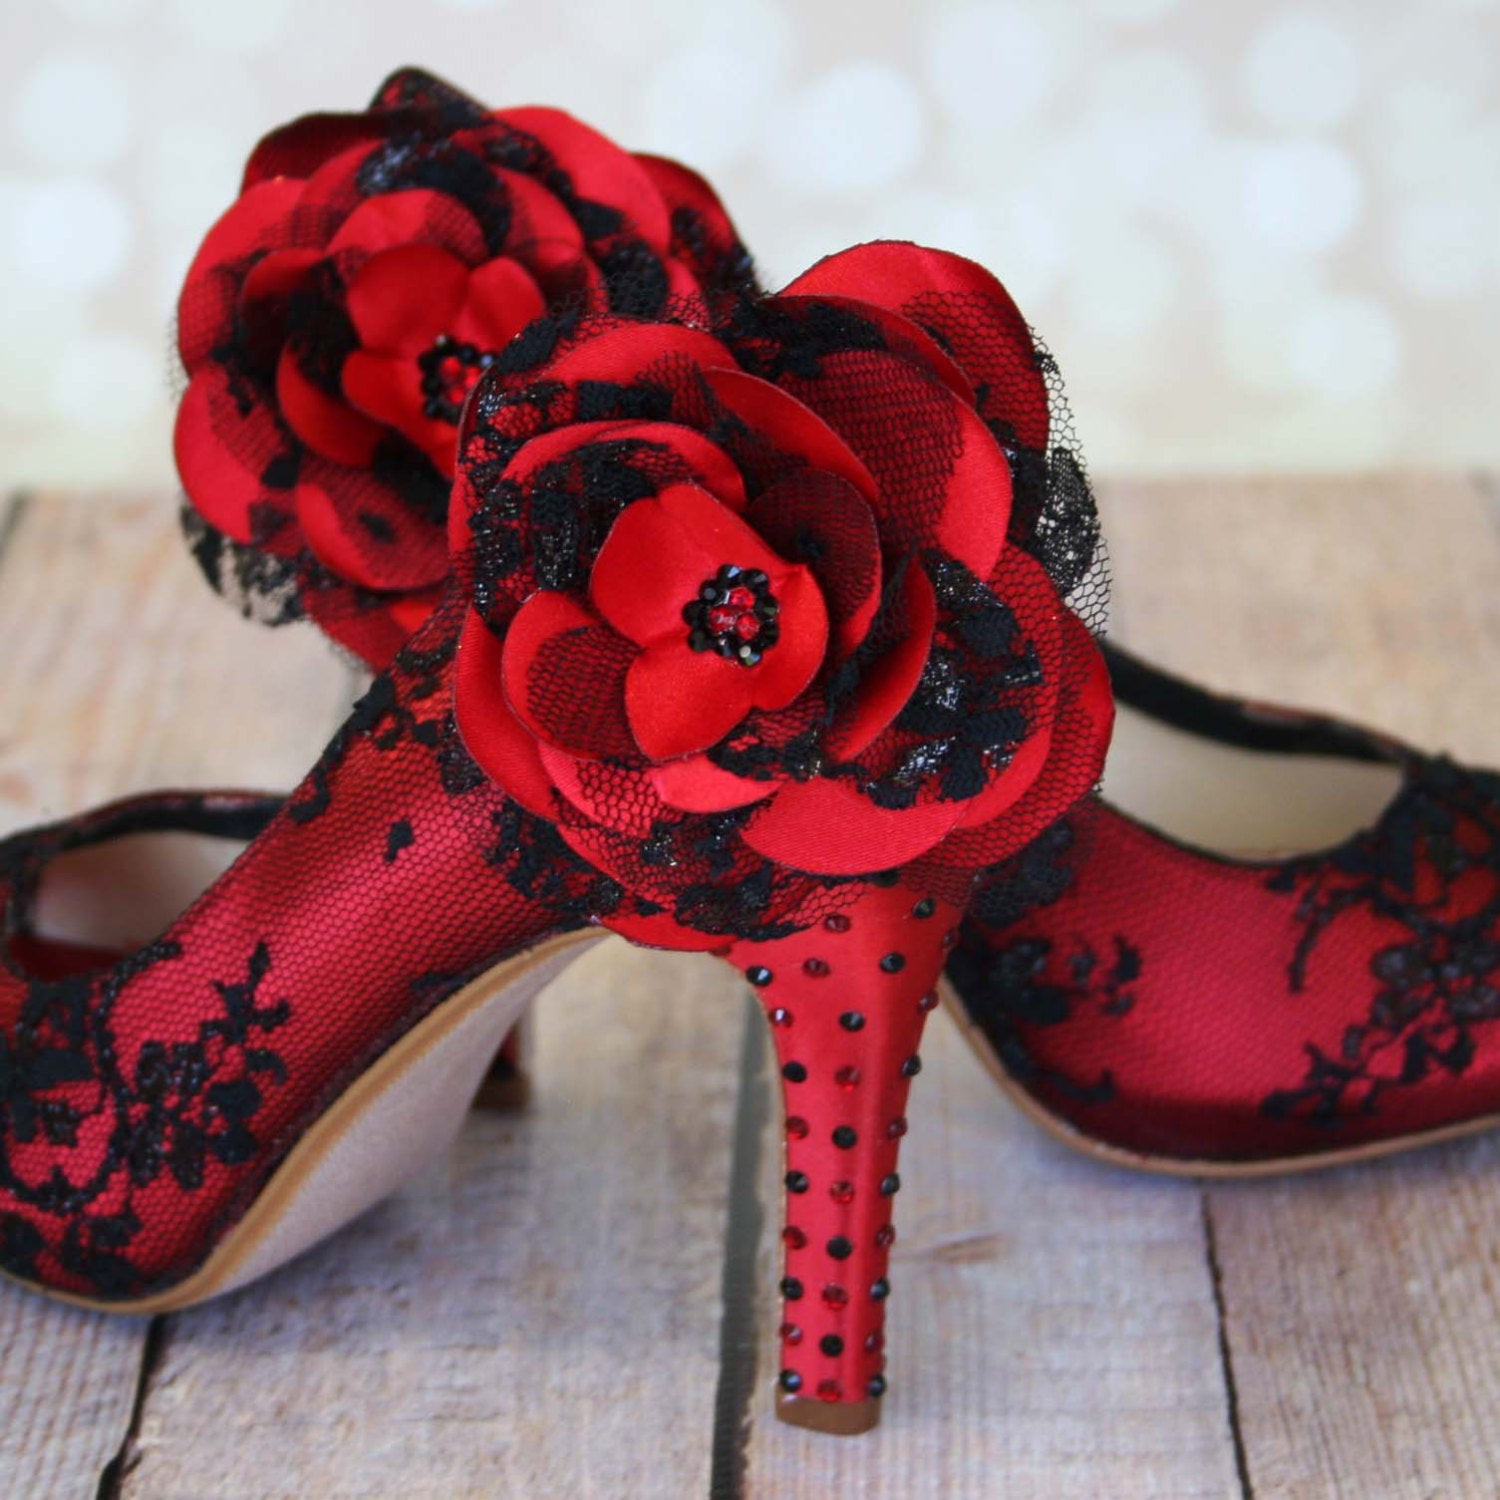 Wedding Shoes Red
 Rockabilly Wedding Shoes Red Lace Heels Black and Red